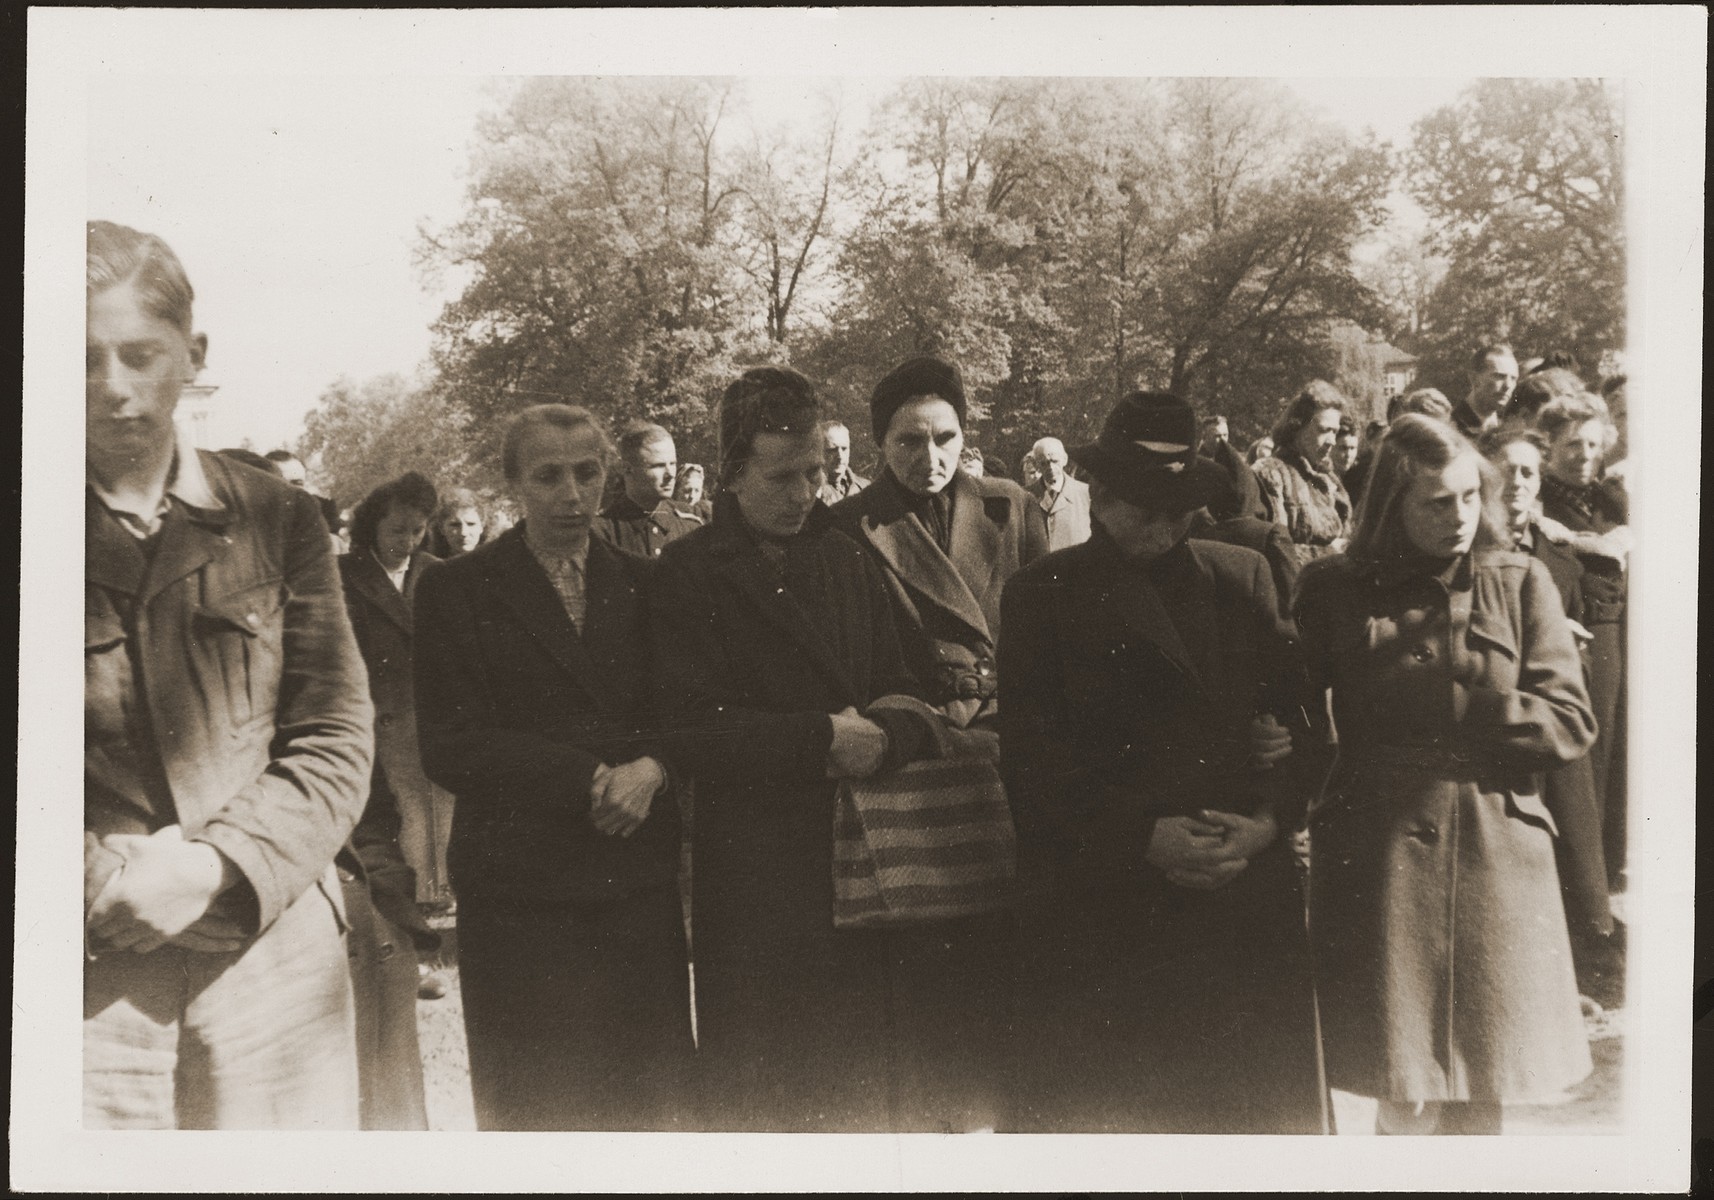 German civilians from Ludwigslust on the palace grounds of the Archduke of Mecklenburg, where they have been forced by U.S. troops to bury the bodies of prisoners killed in the Woebbelin concentration camp.